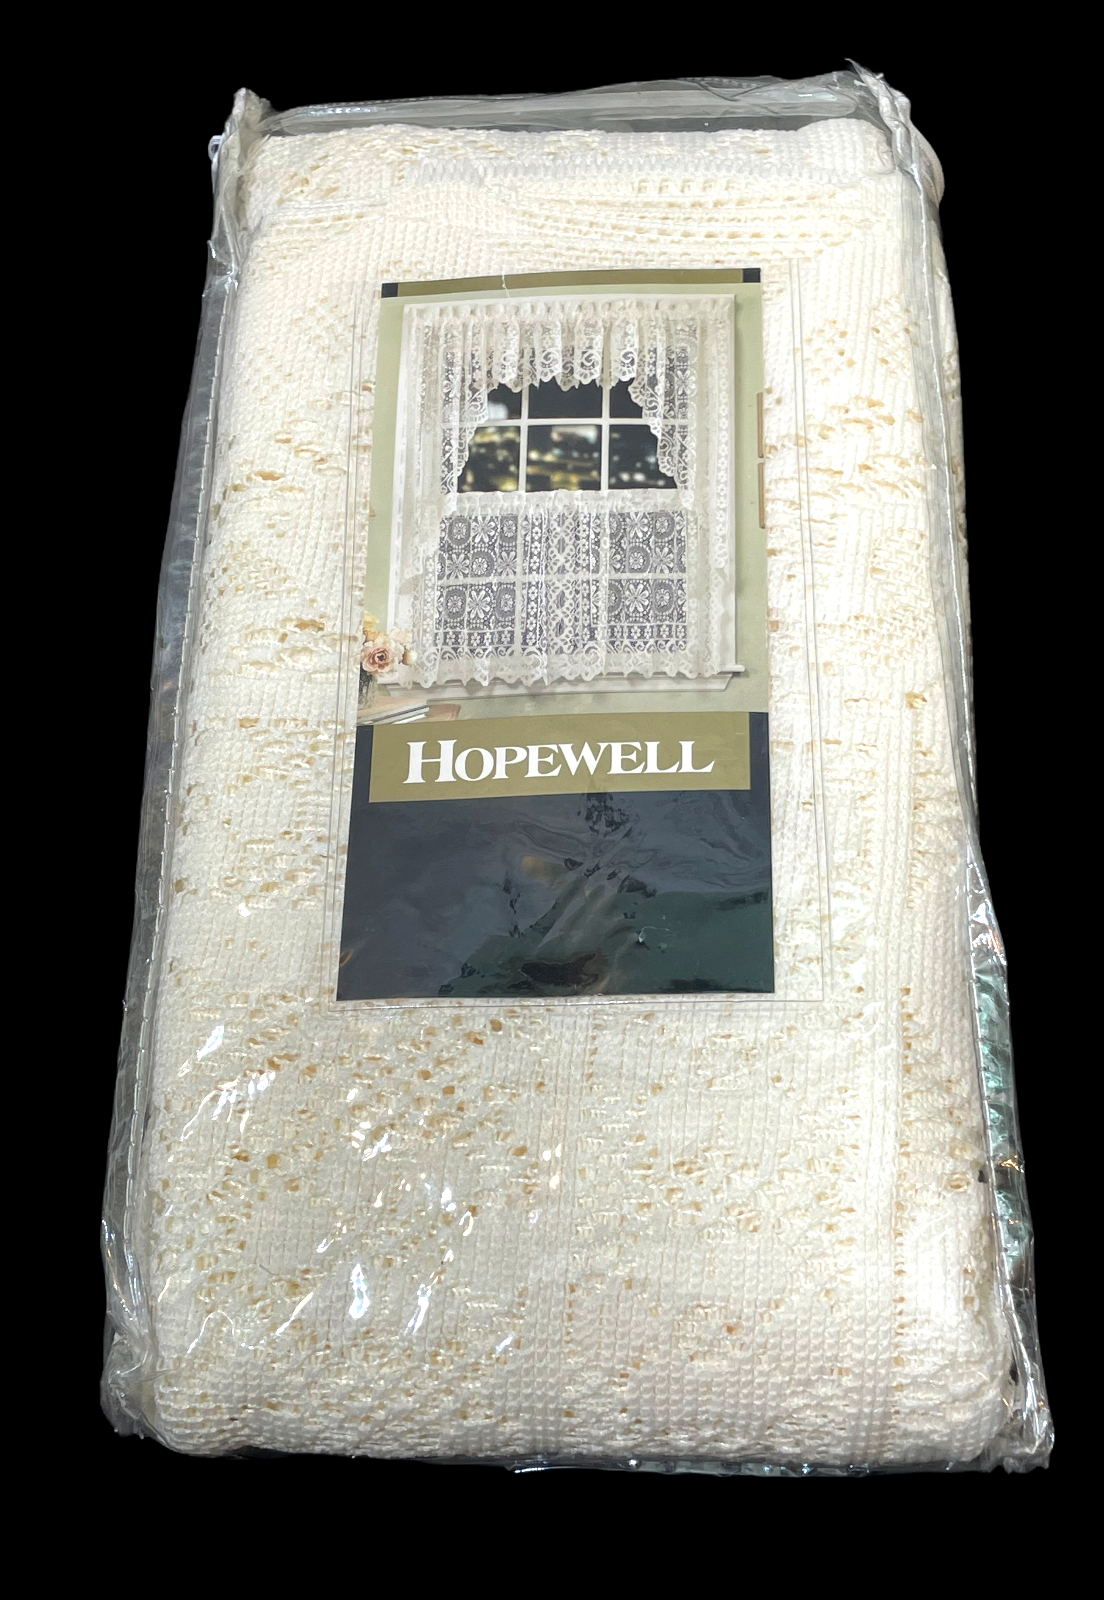 Hopewell Jacquard Lace Tier Pair 58" x 24" Country Cream Rod Pocket Floral Sheer - $19.80